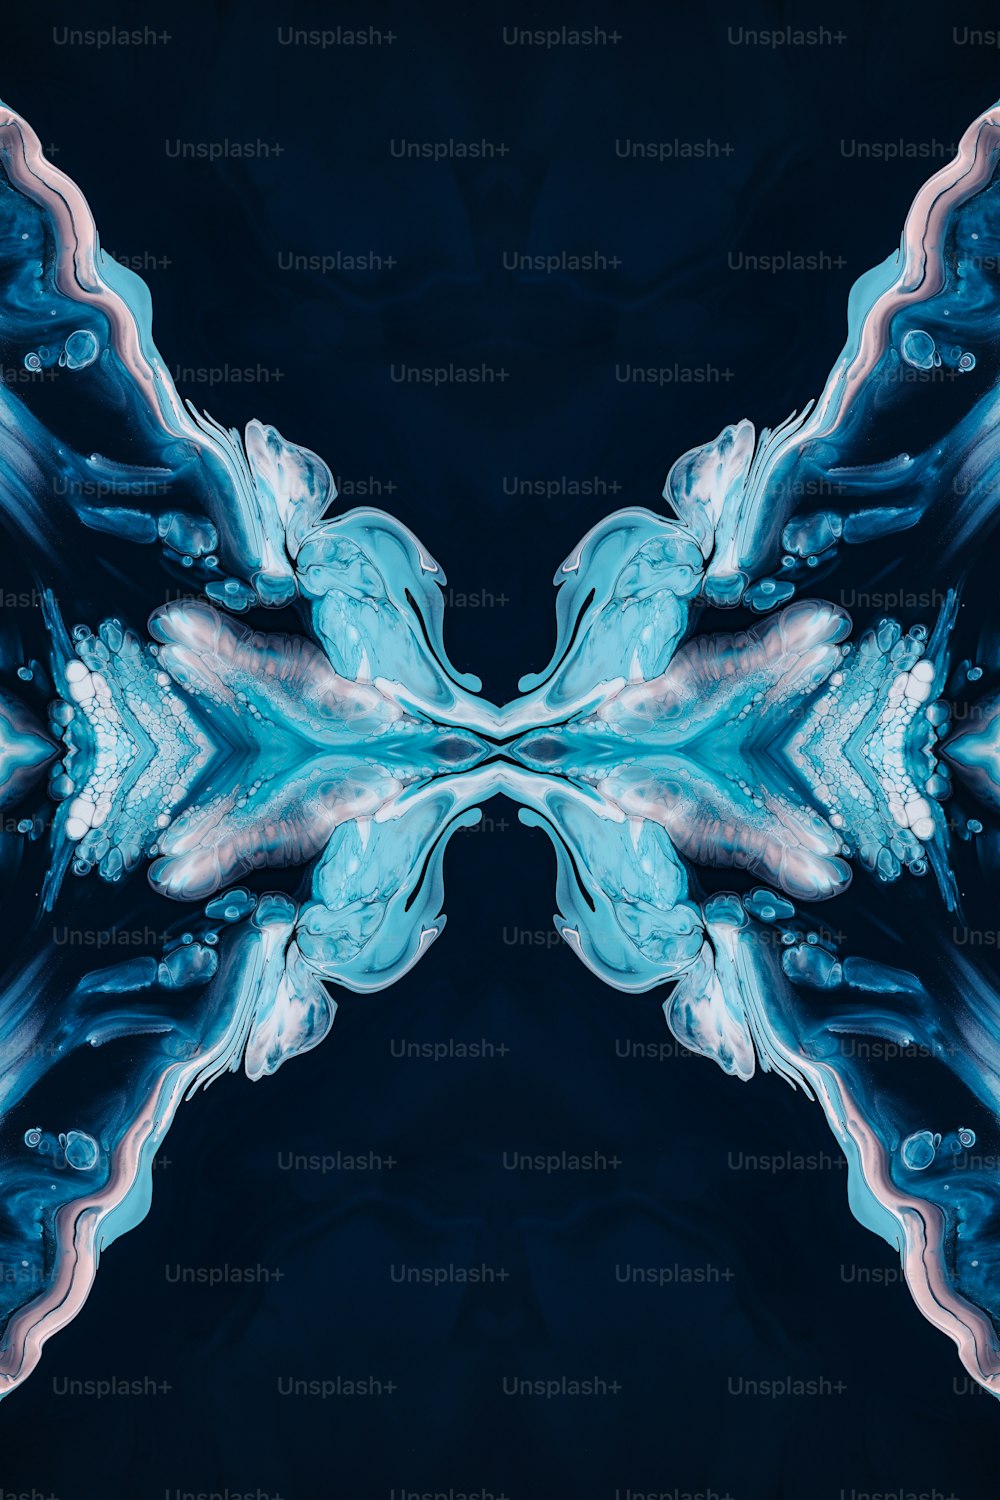 an abstract image of blue and white shapes